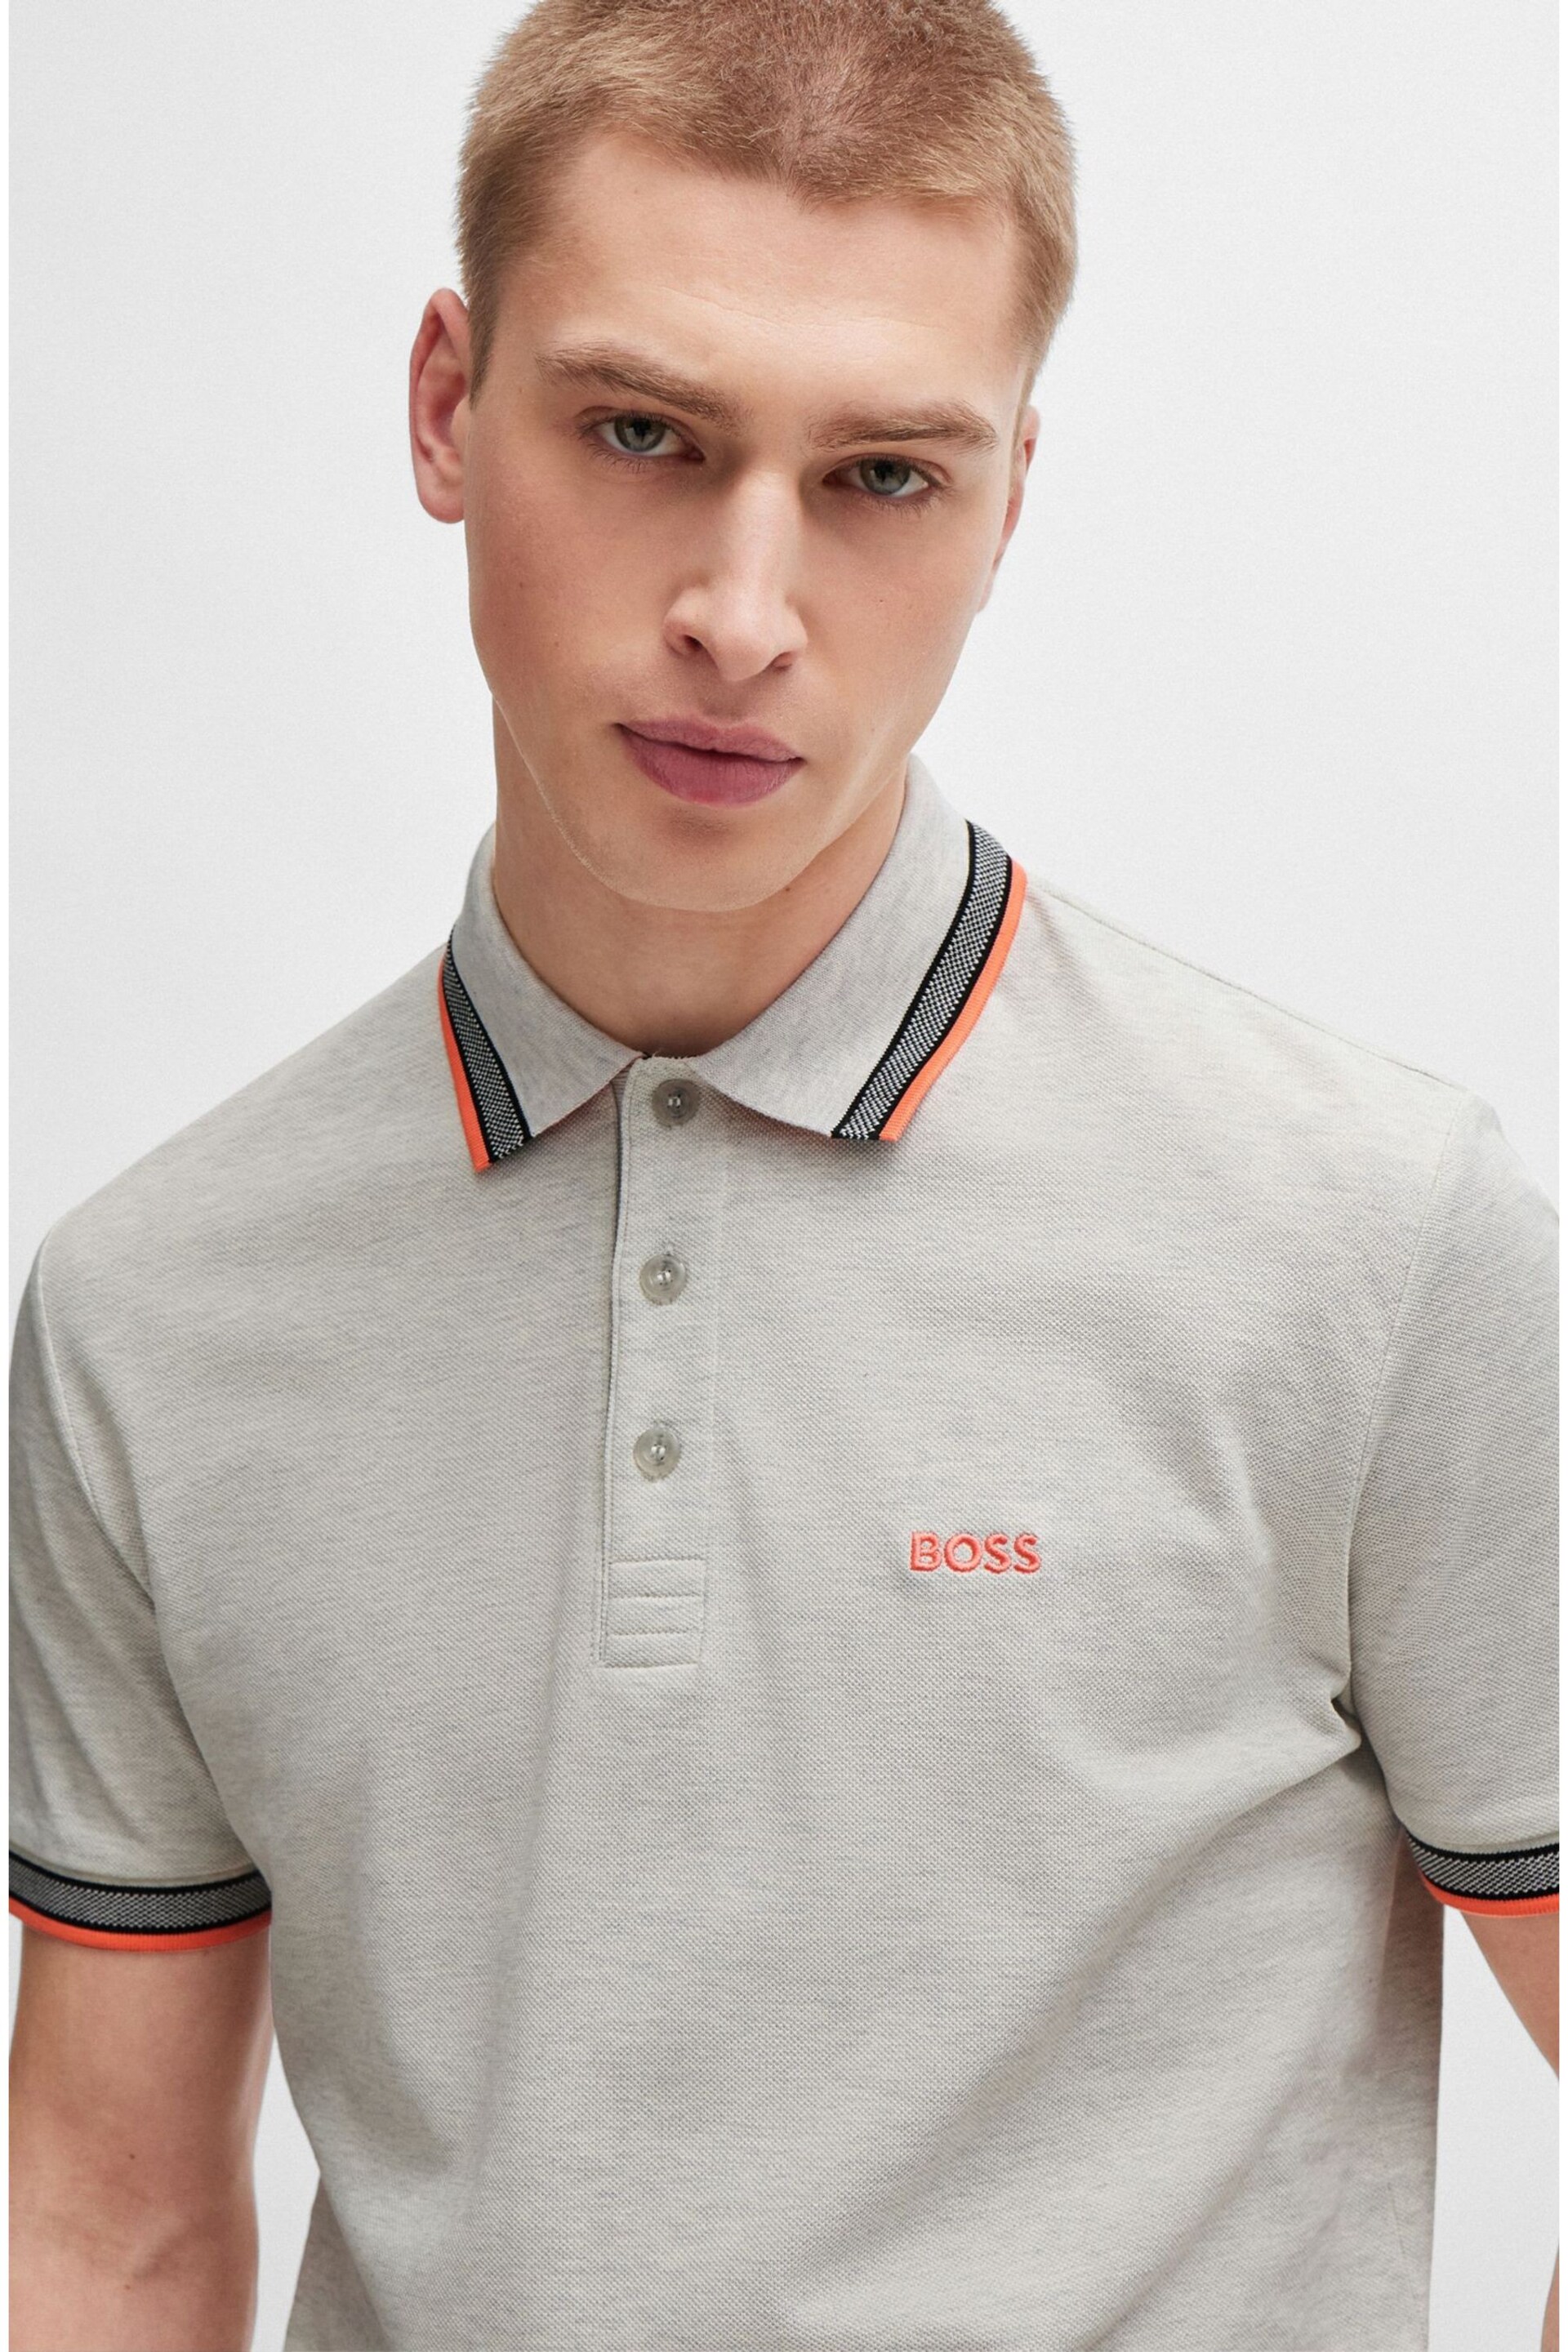 BOSS Light Grey Cotton Polo Shirt With Contrast Logo Details - Image 1 of 5